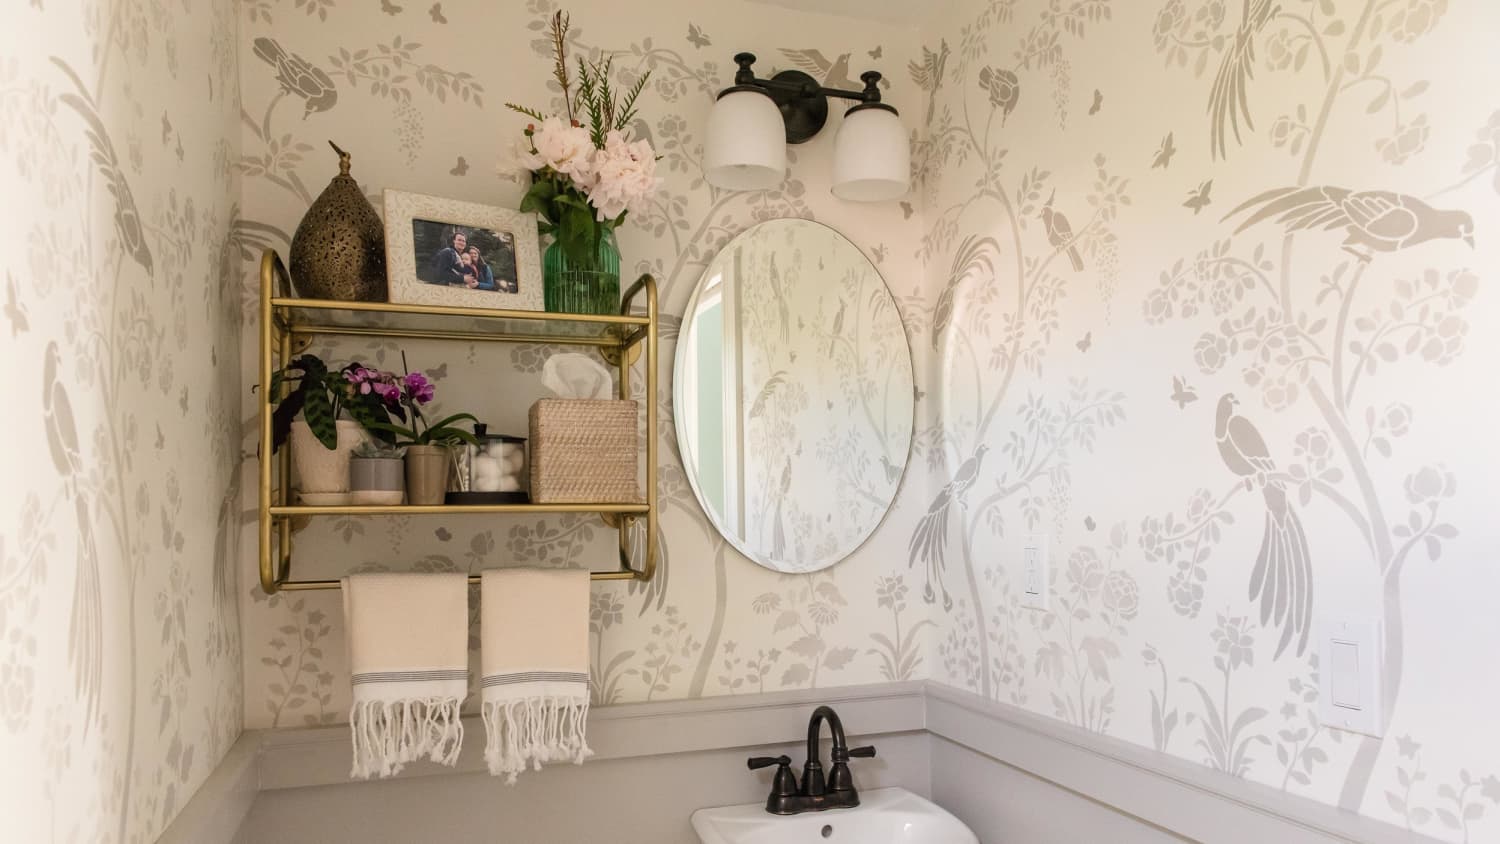 Stencil Paint Or Wallpaper: Which One Should You Choose?